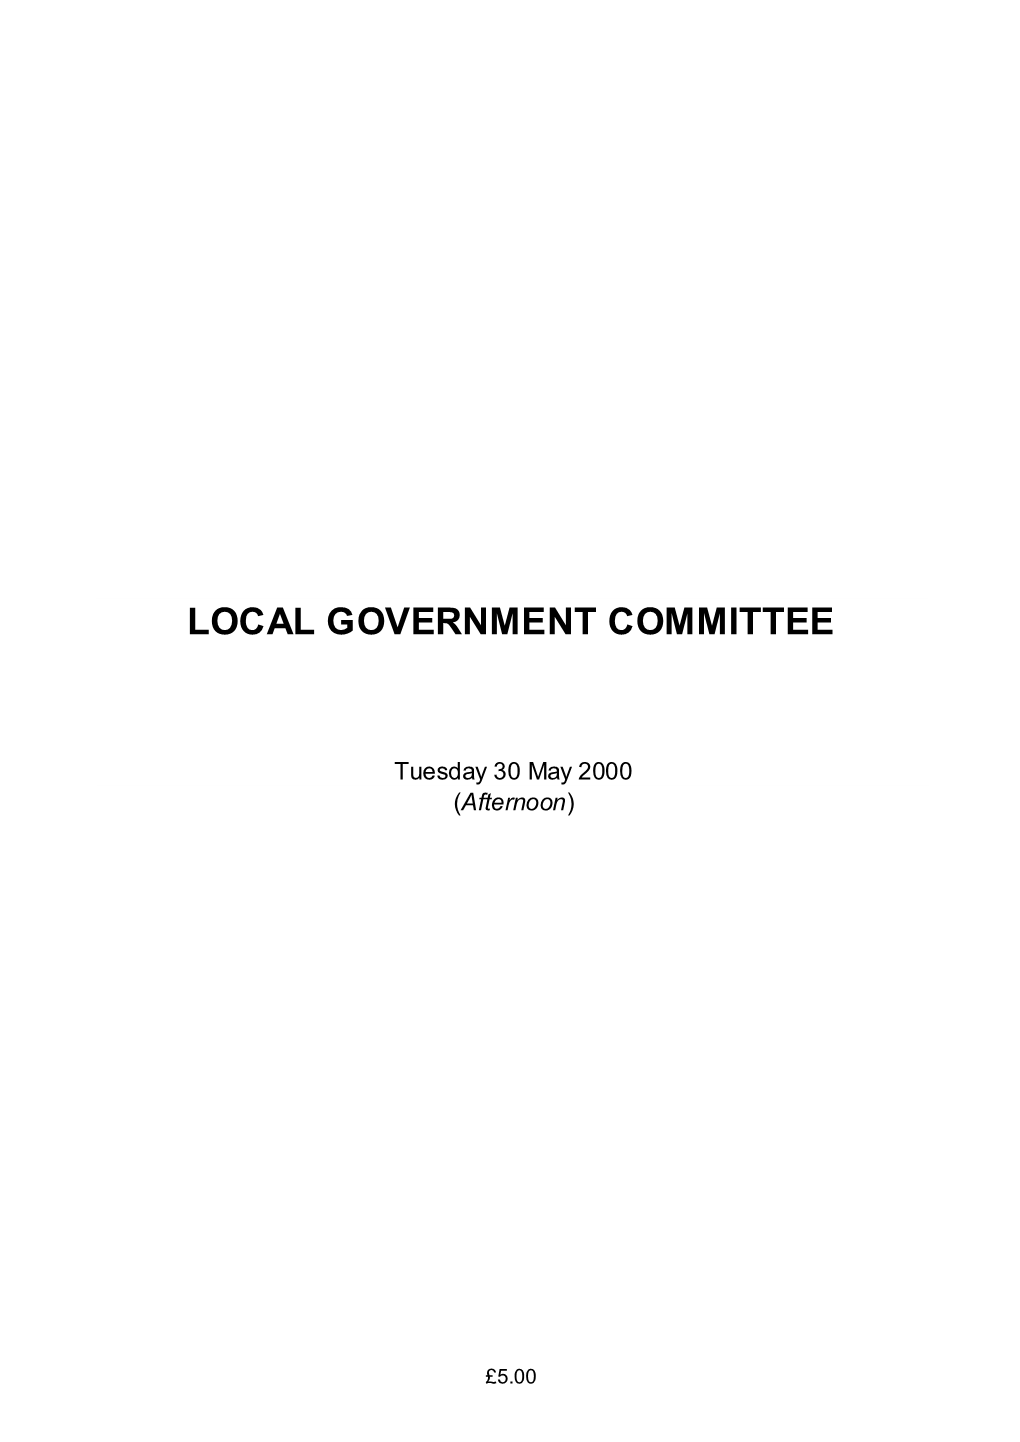 Official Report, Initiative in Schools That Will Help Our Children to Be Equal Opportunities Committee, 20 March 2000; C 532.] Safe As They Grow Up